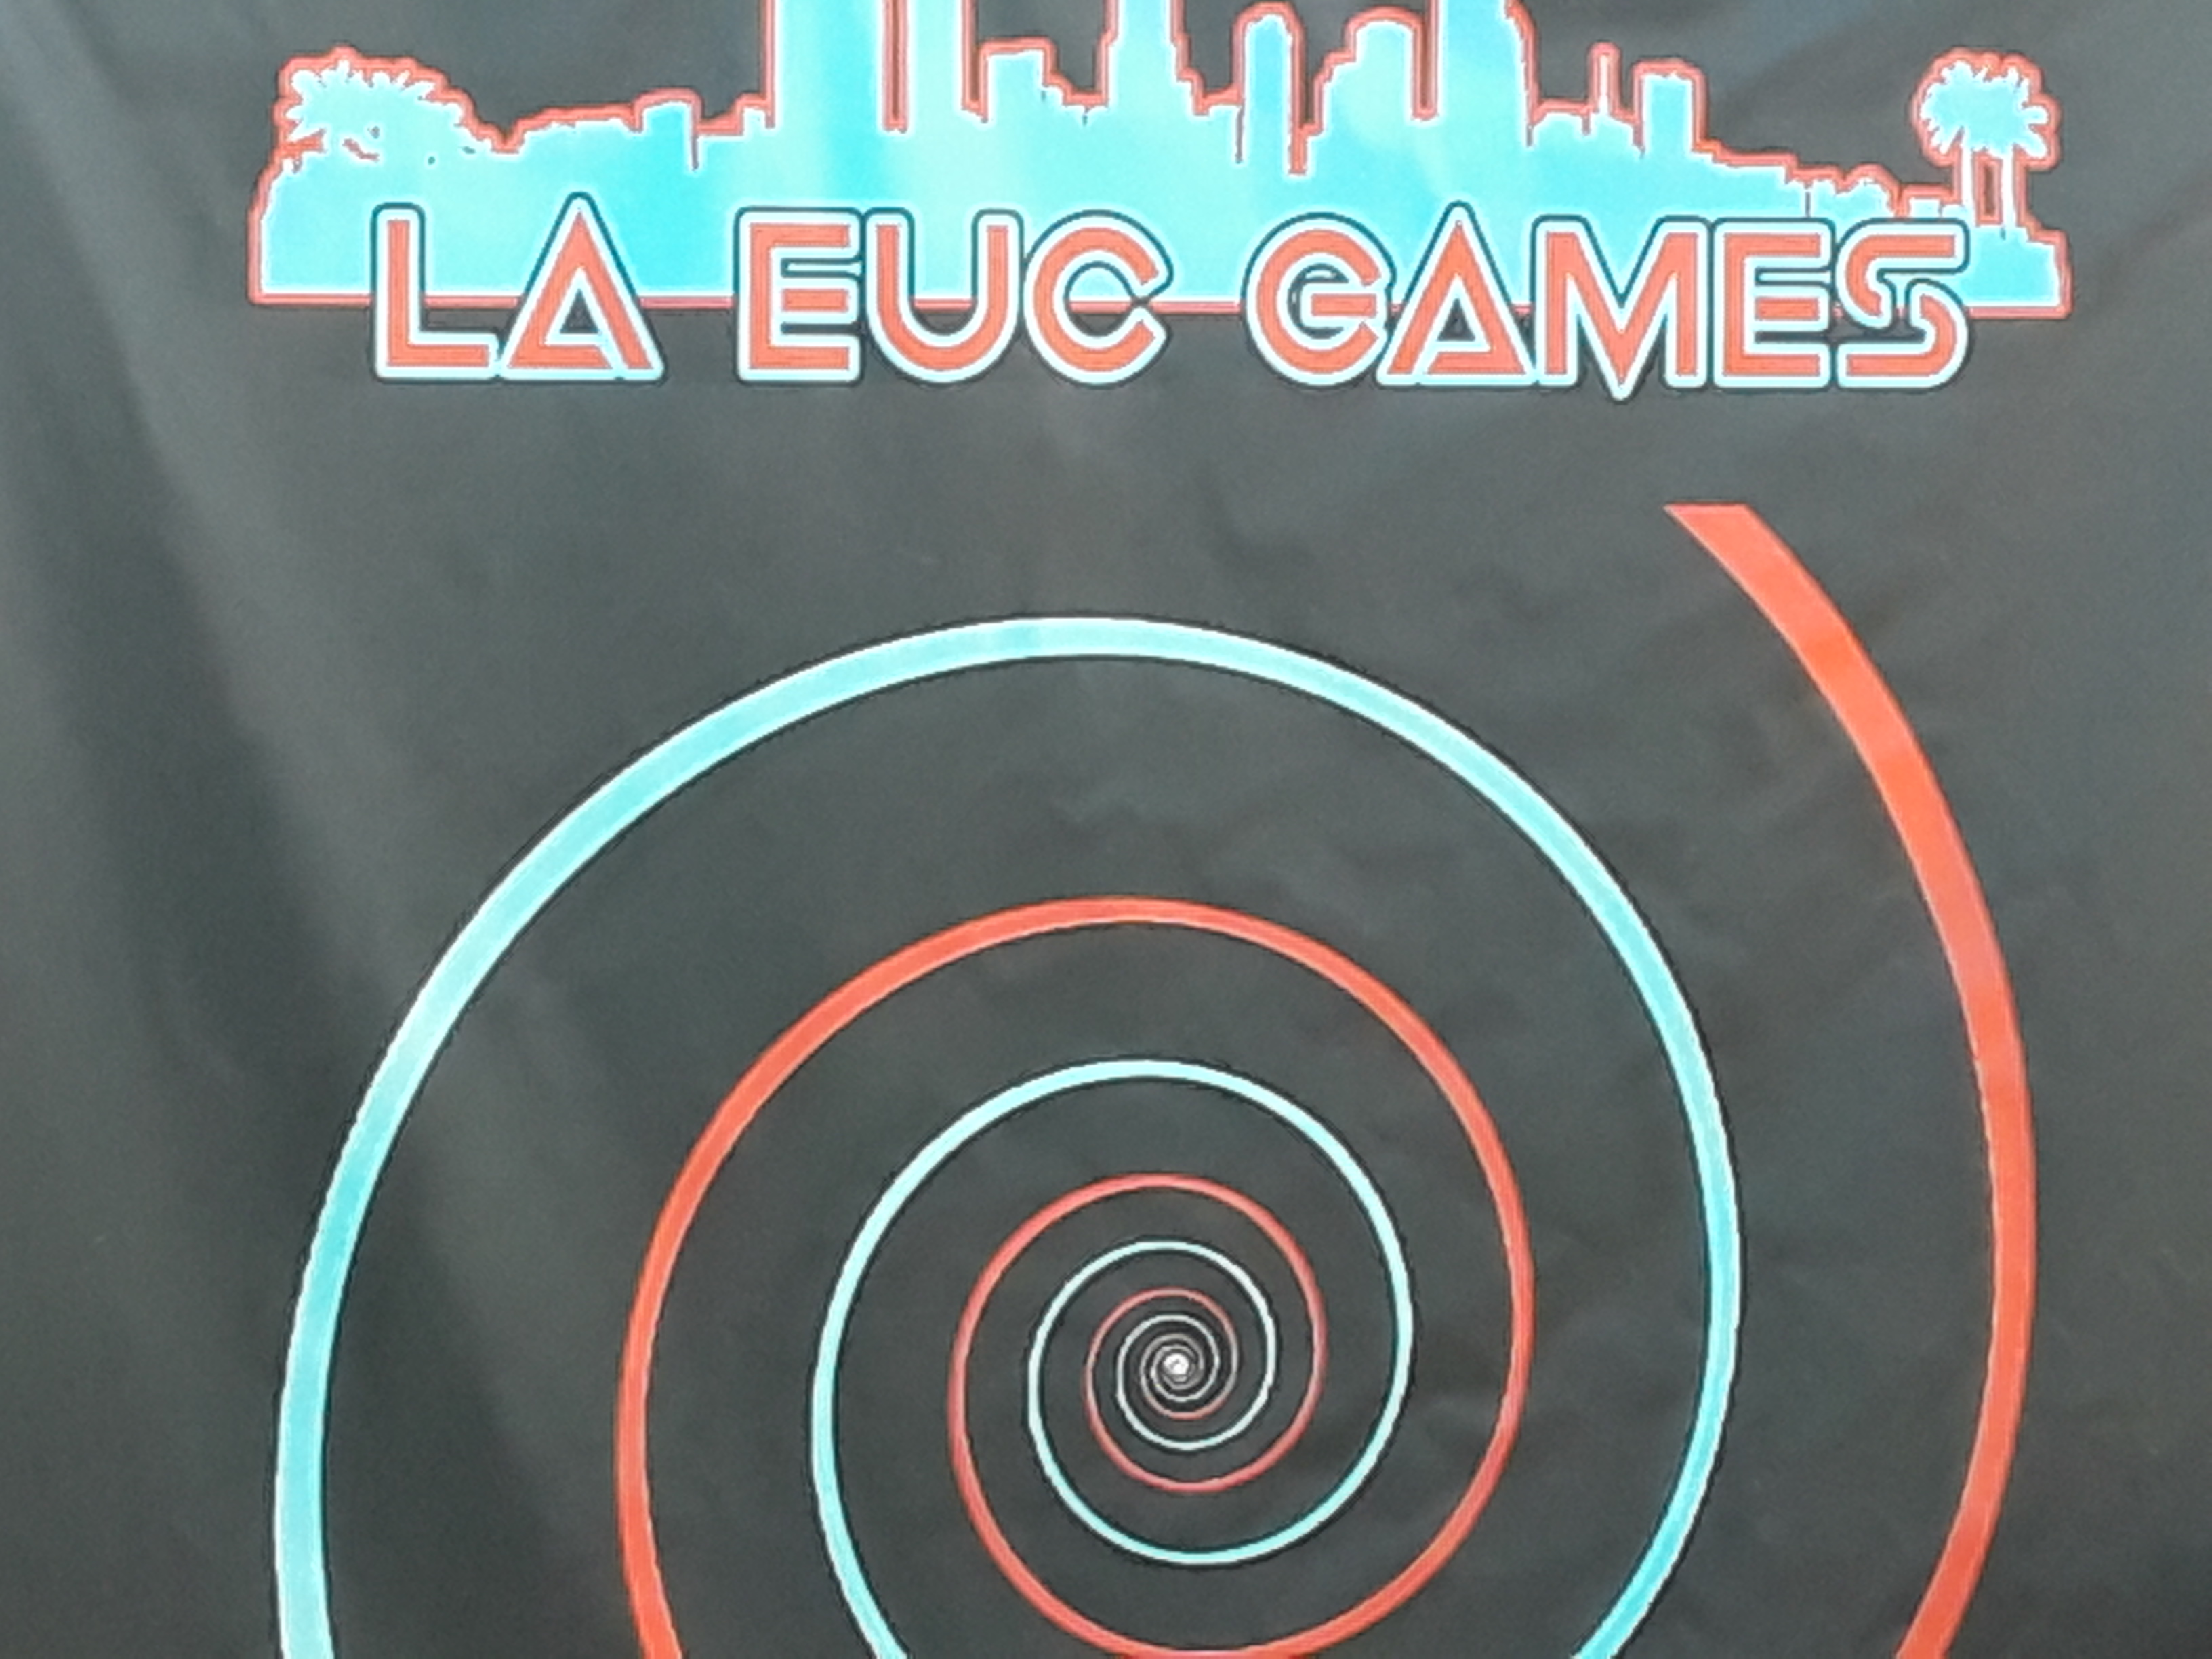 Electric Unicycle Games (EUC) in Encino, California visited by CargoCatch